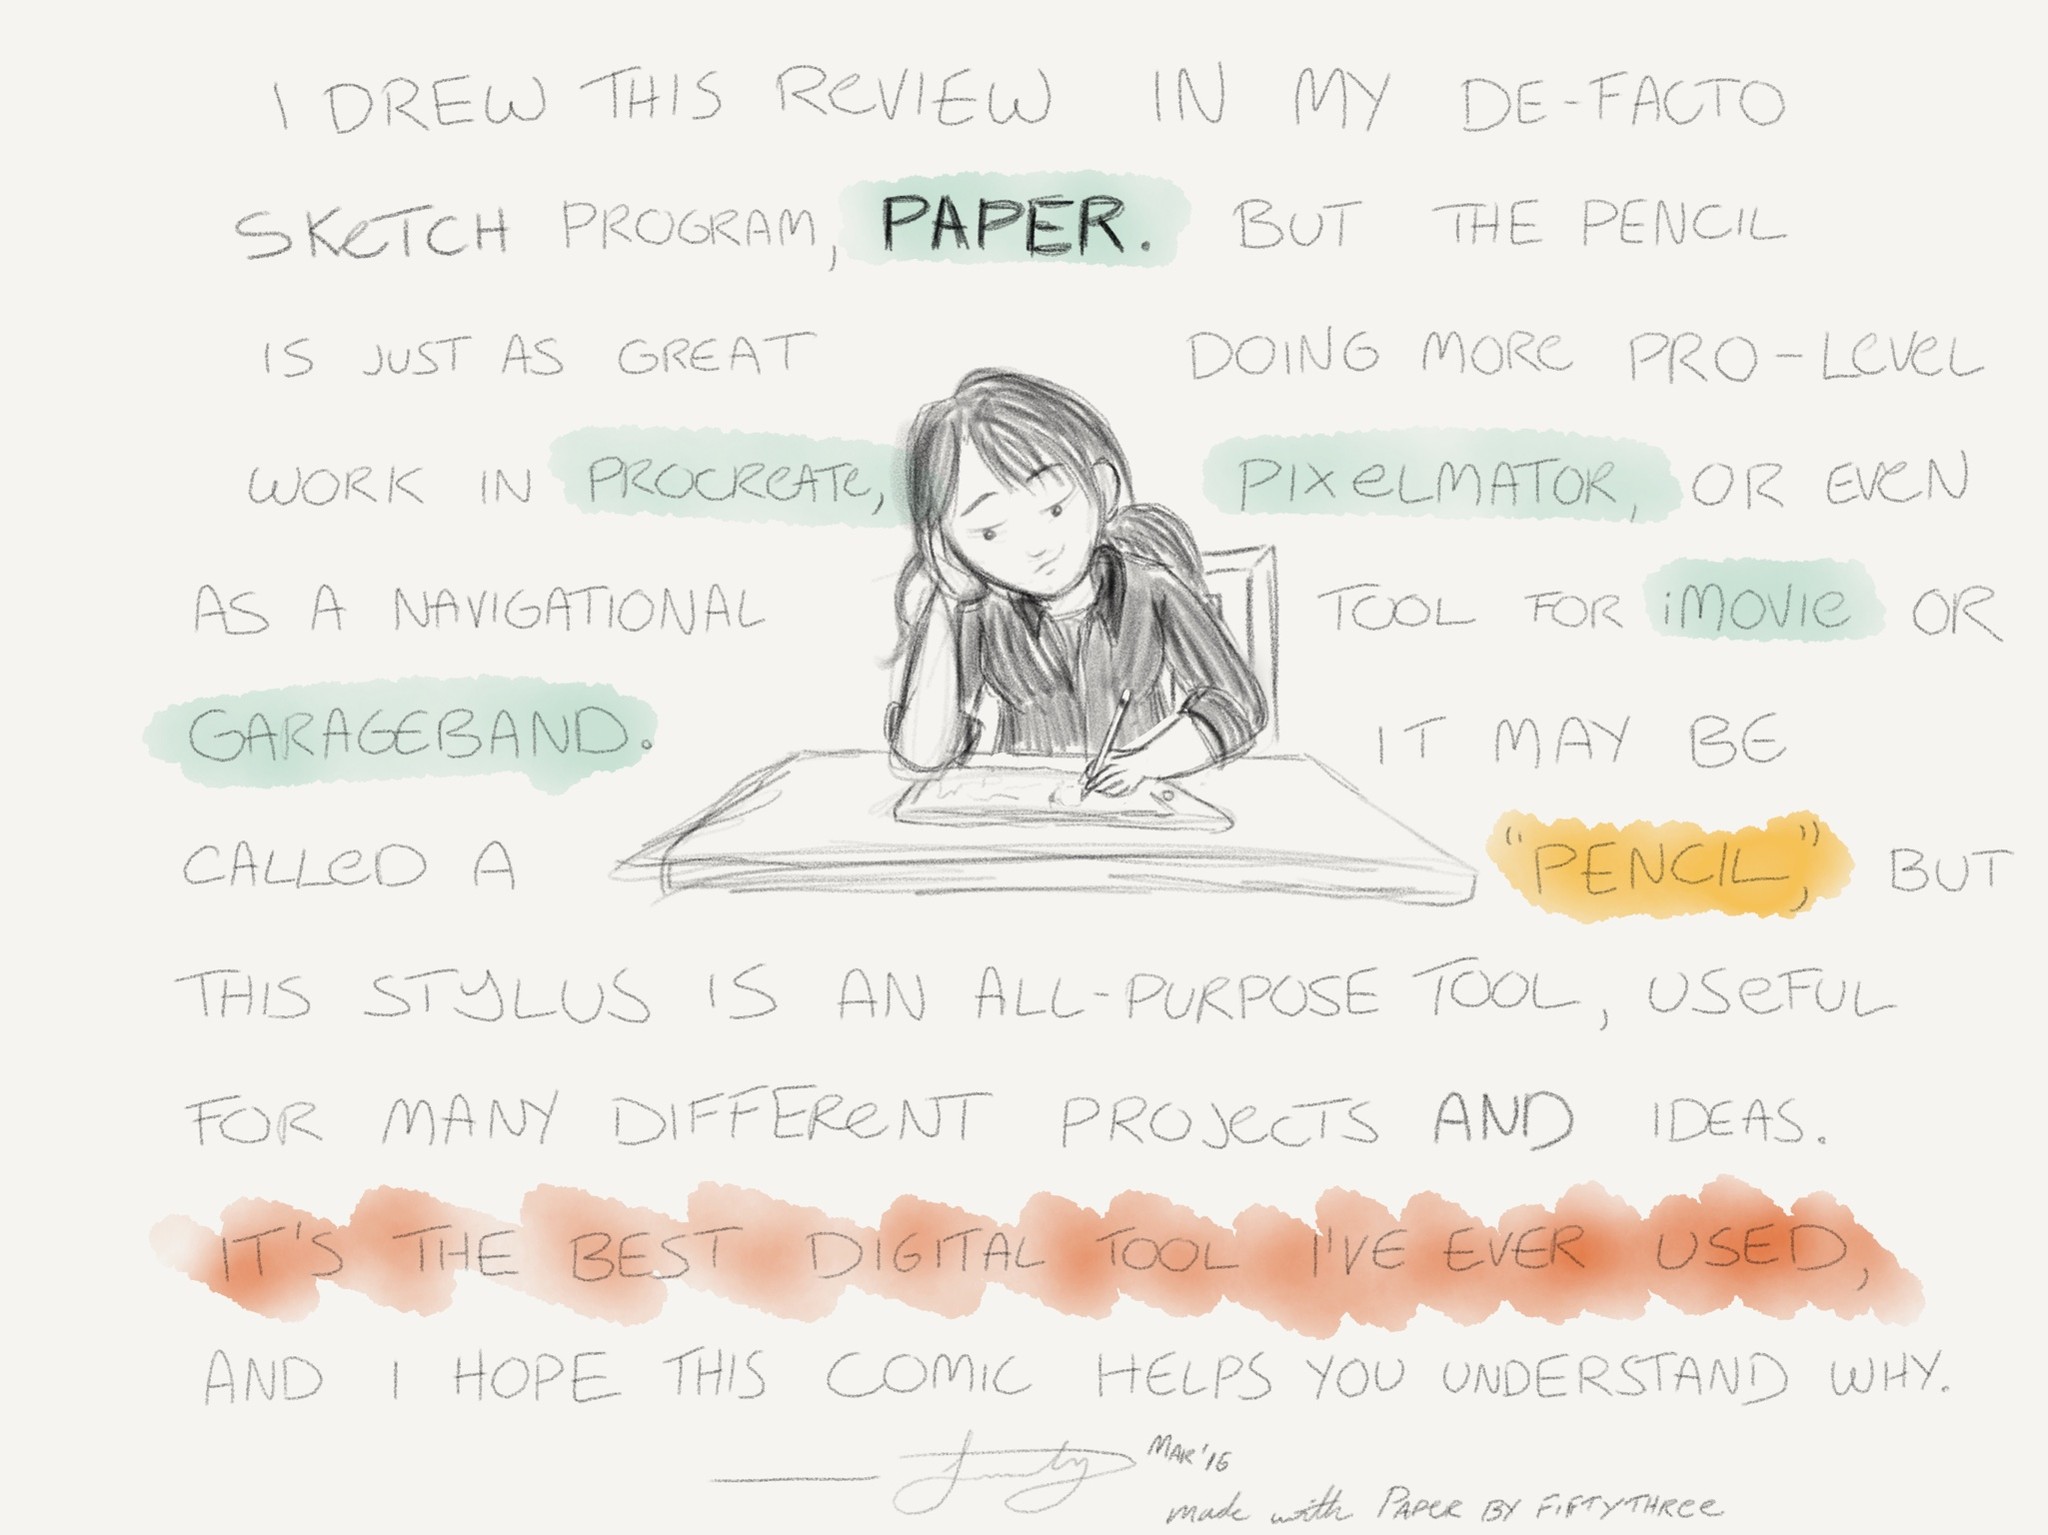 I drew this review in Paper, but the Pencil works just as well making pro-level work in Procreate and Pixelmator, or even as a navigational tool in GarageBand or iMovie. It may be called a Pencil, but the stylus is an all-purpose tool. It's the best digital one I've ever used, and I hope this comic helps you understand why.